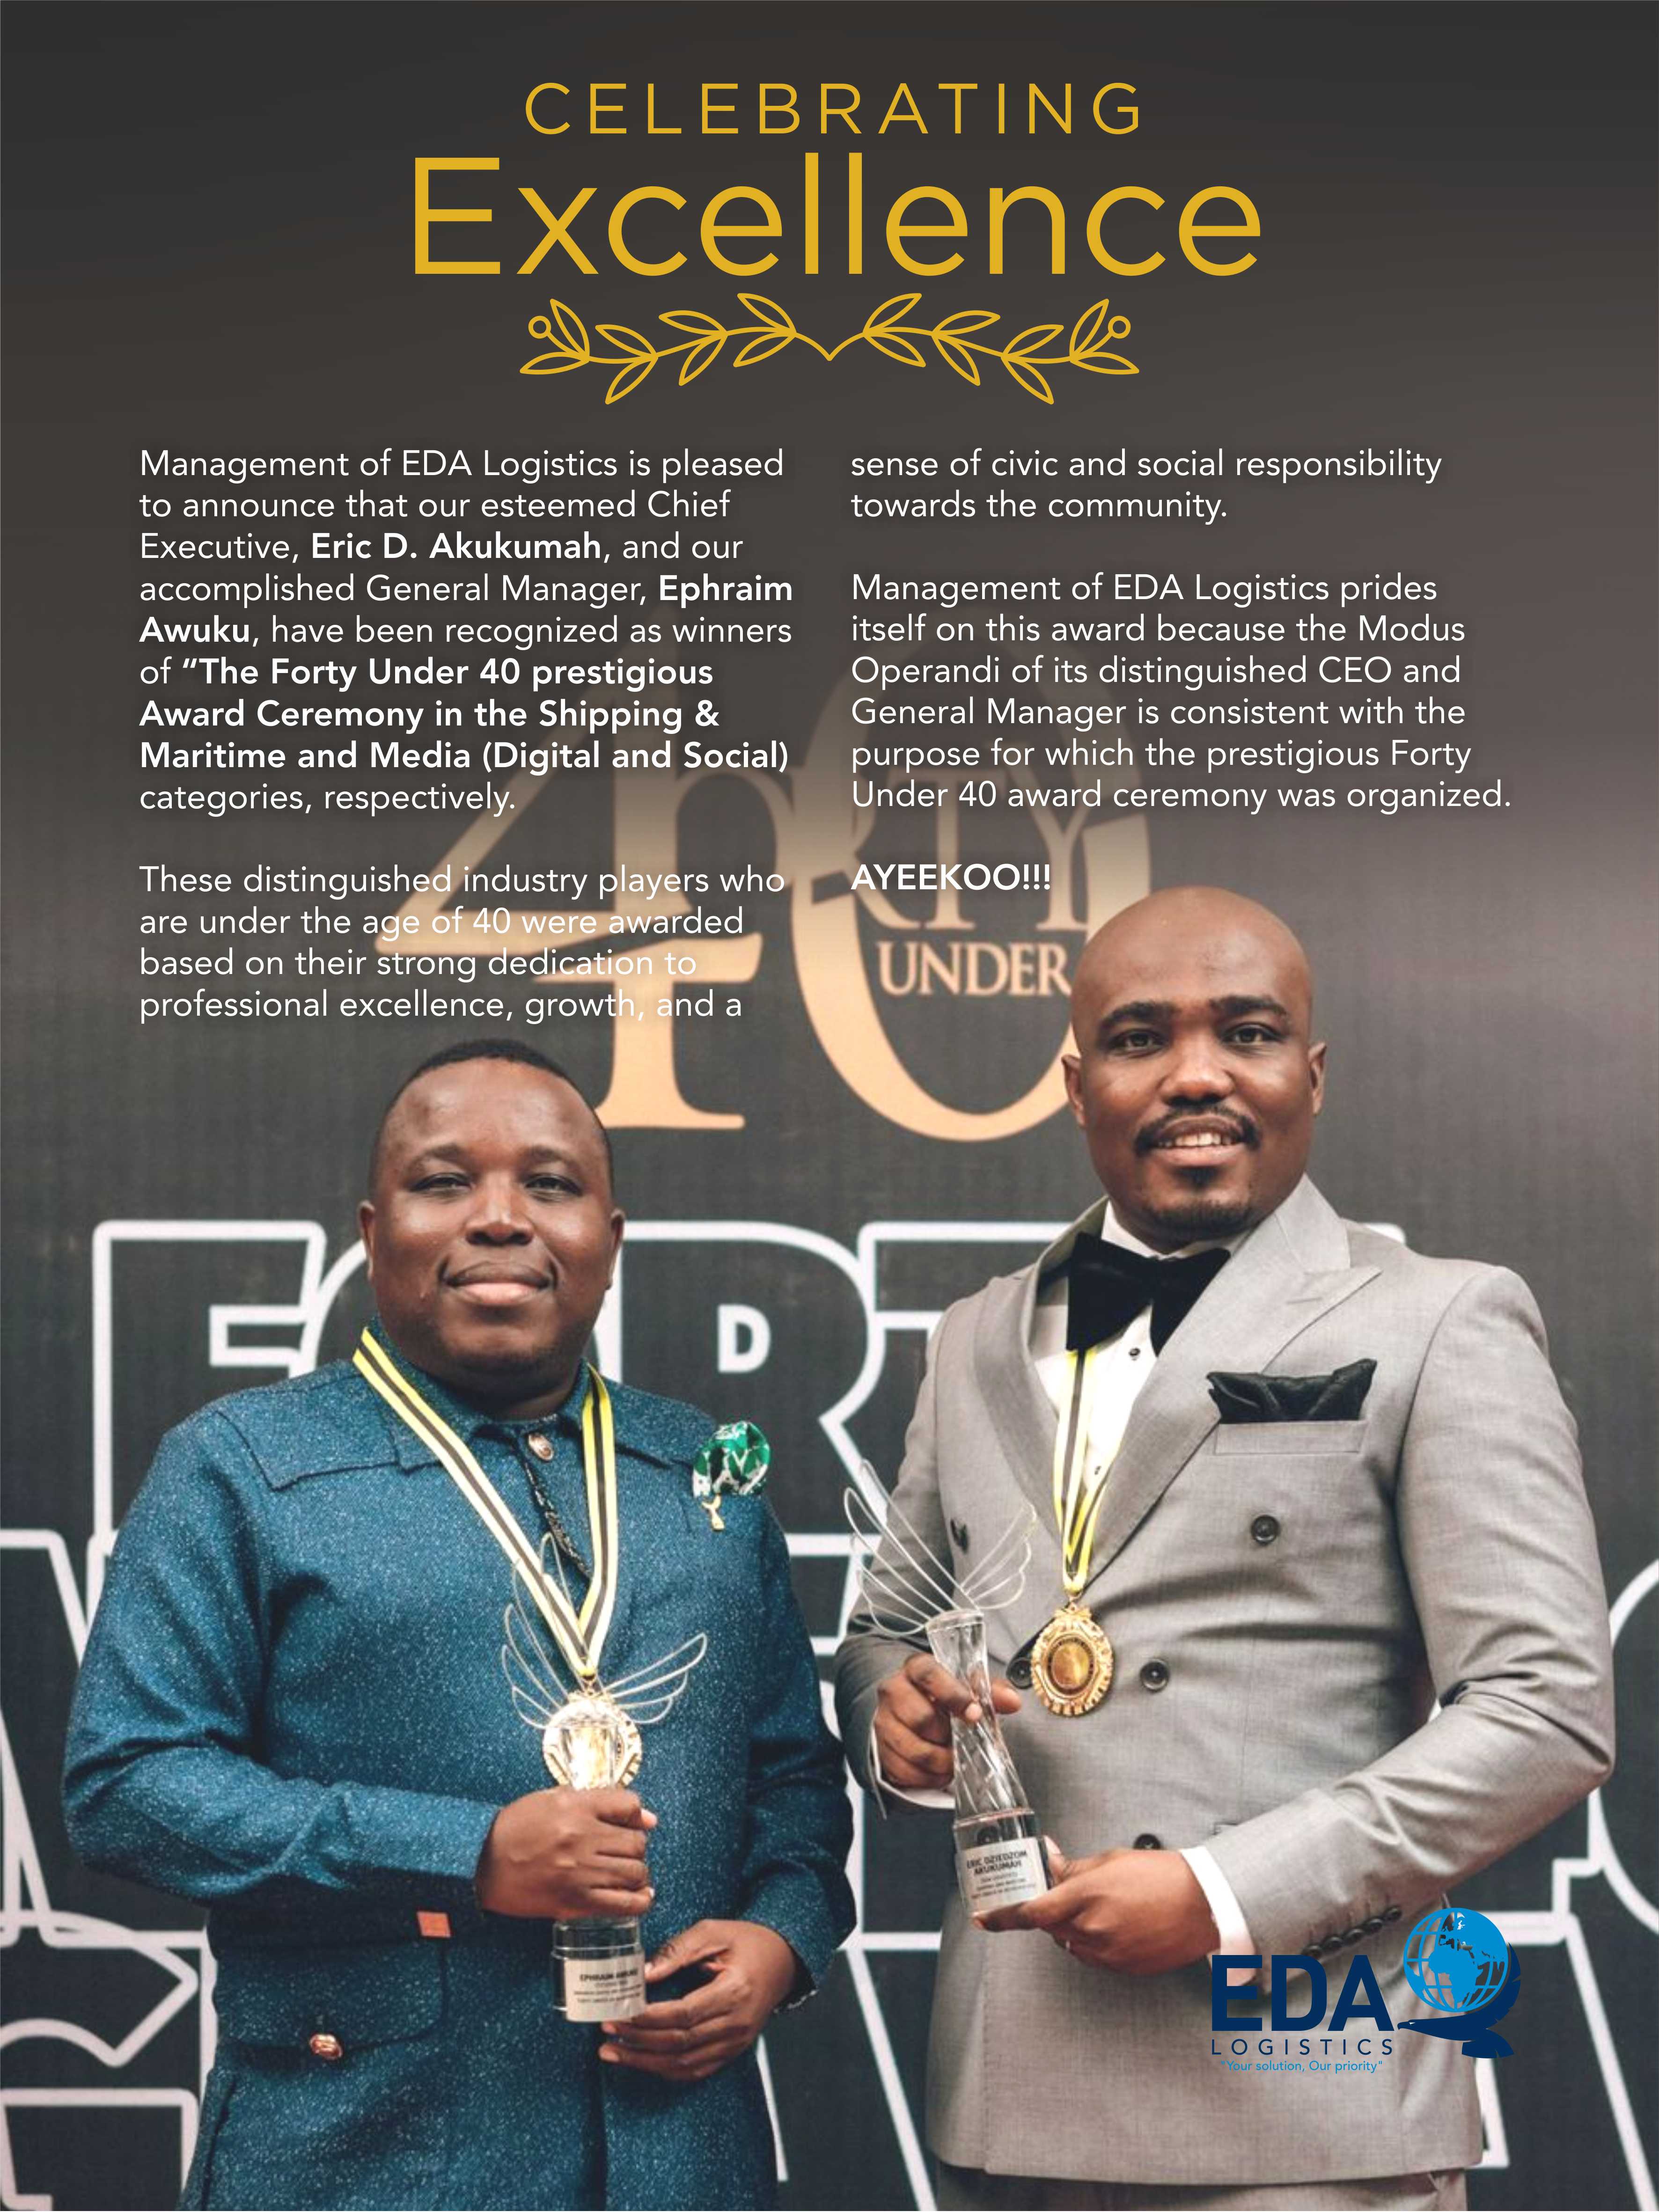 The Forty under 40 prestigious Award Ceremony n the Shipping & Maritime and Media (Digital and Social) categories